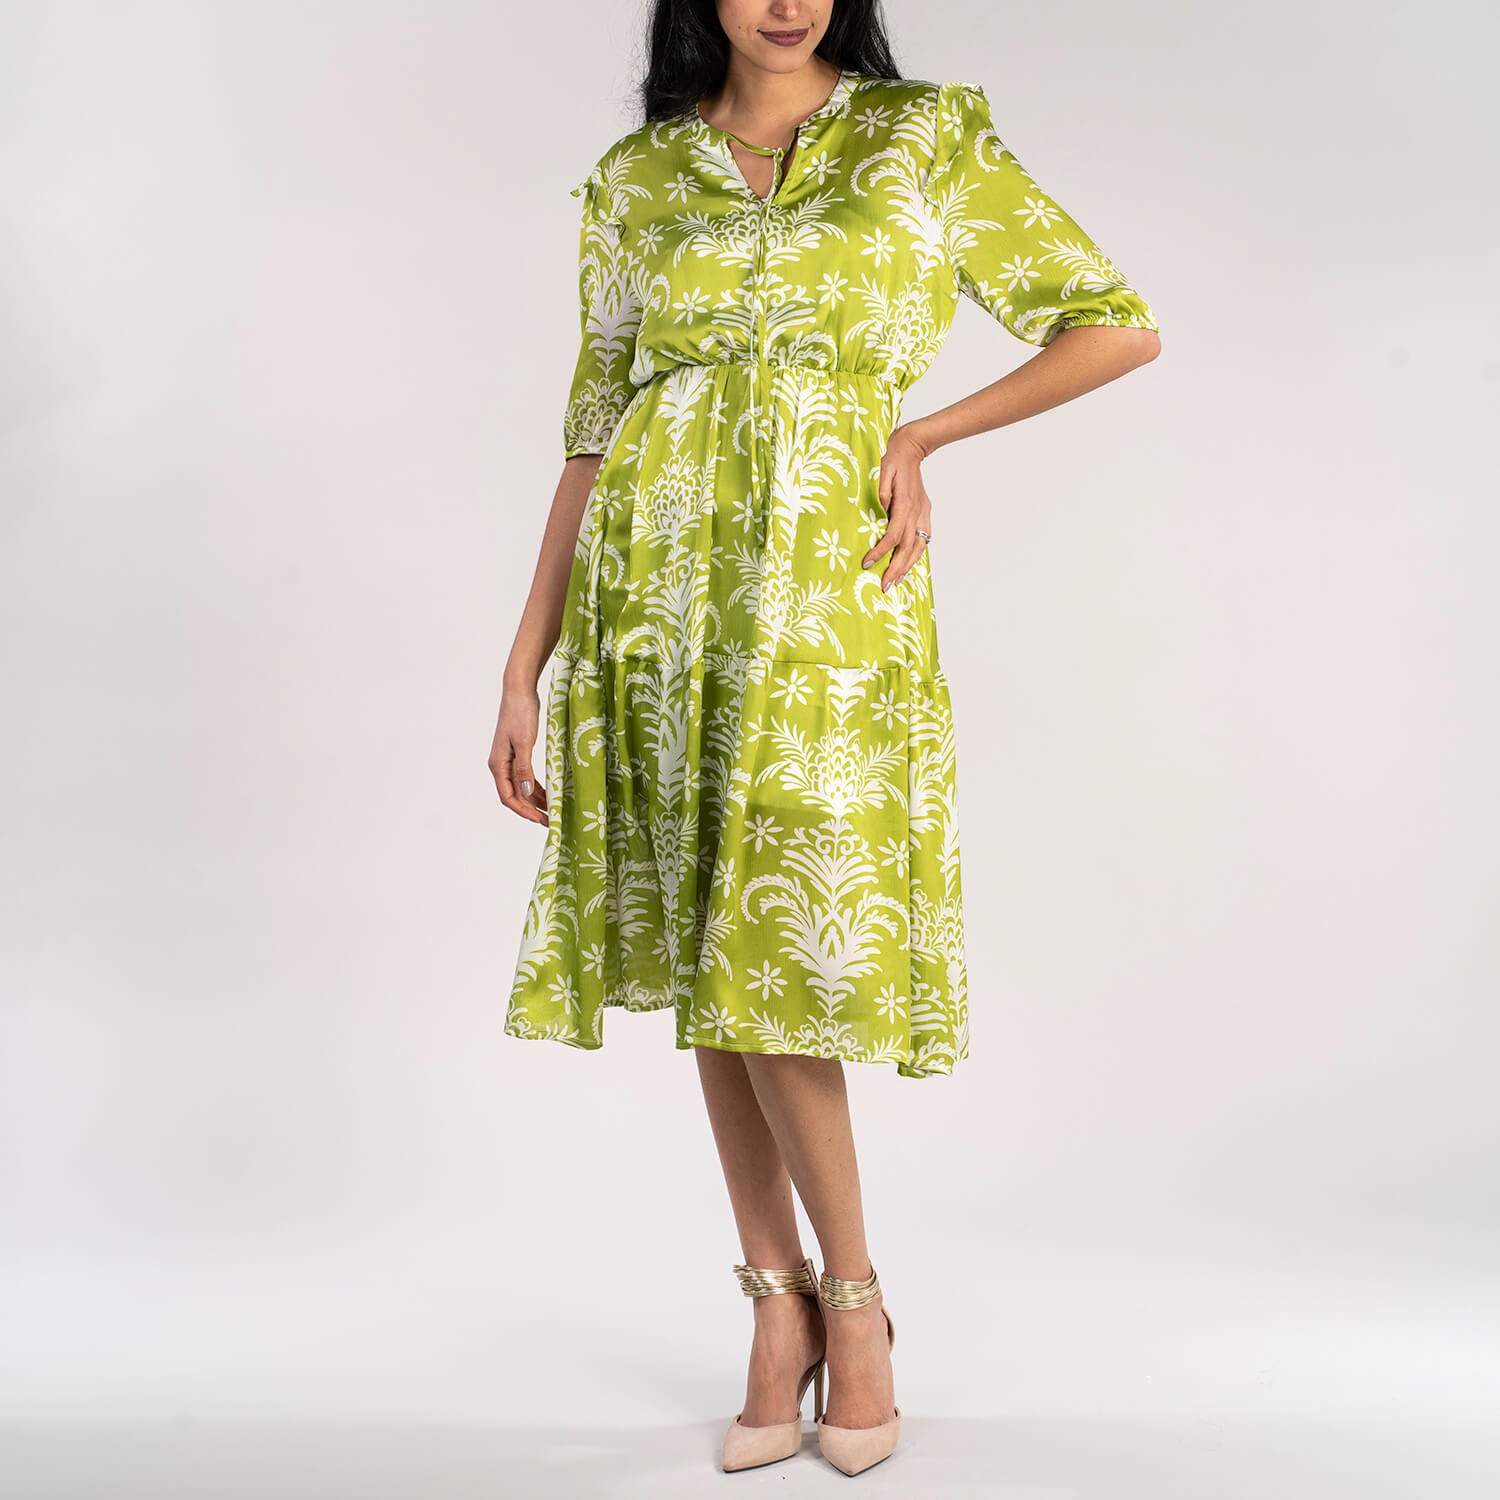 Naoise Nancy Dress - Lime 3 Shaws Department Stores